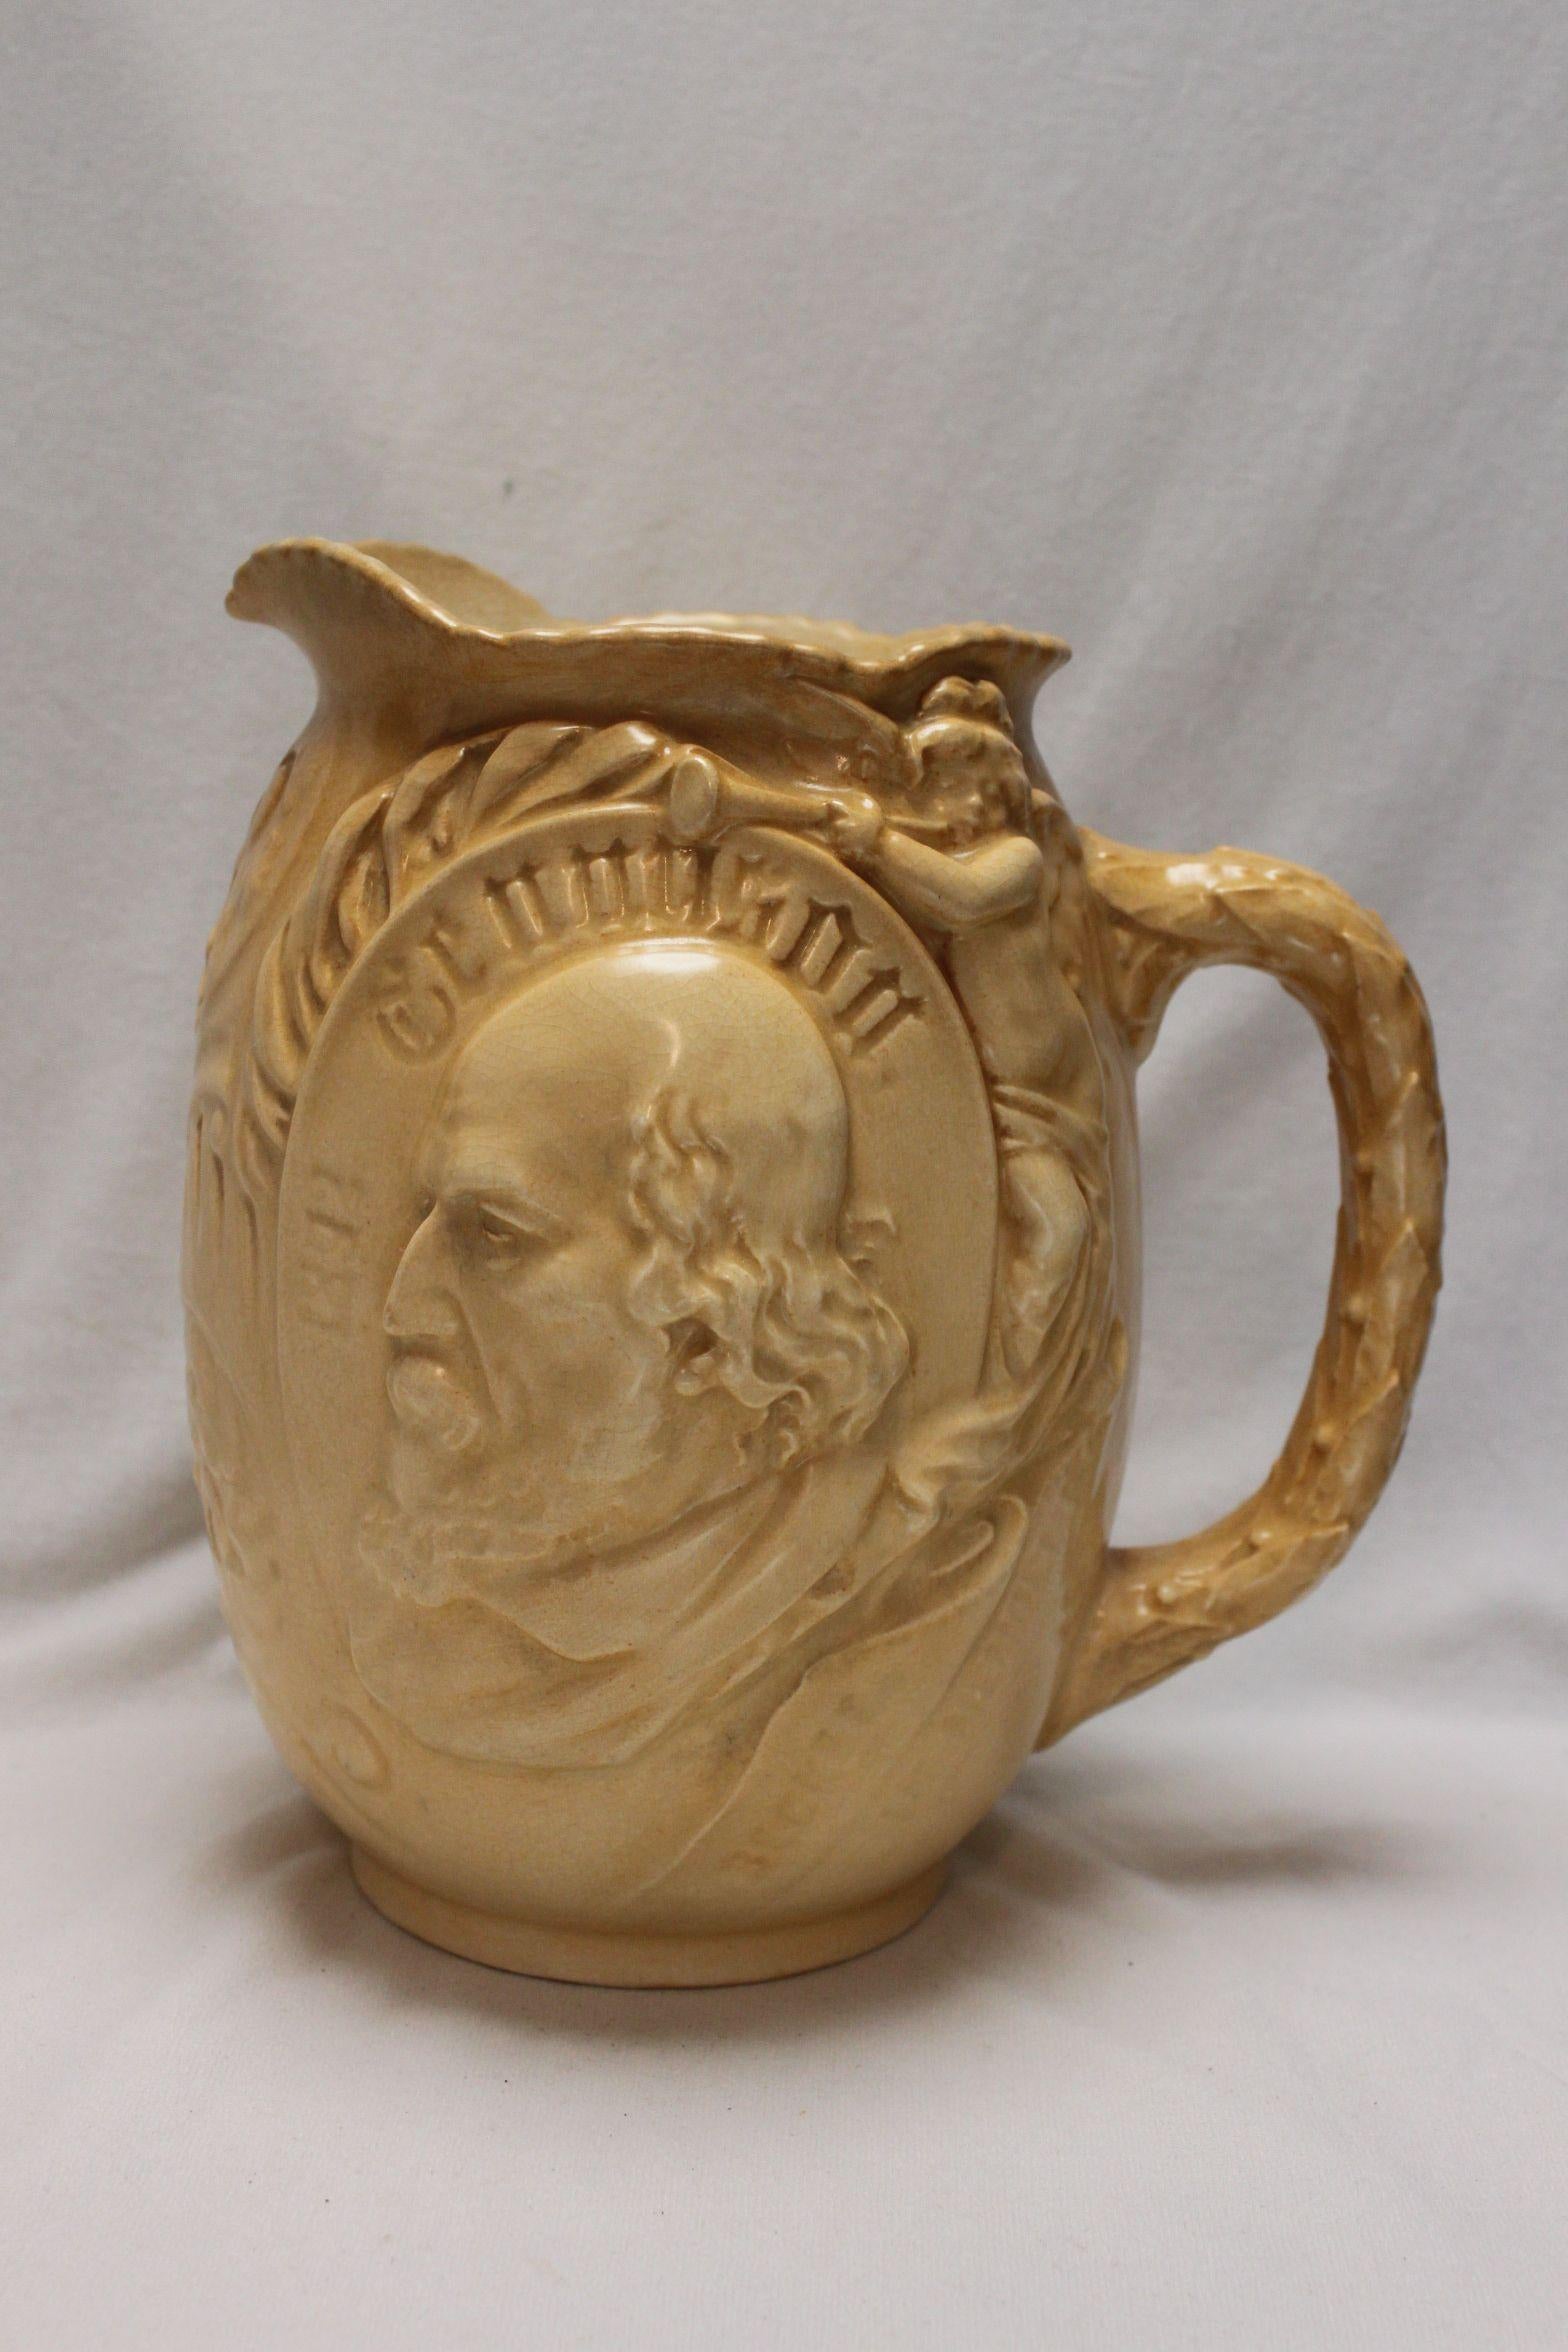 This Doulton Burslem jug was issued in 1892 to mark the death of Alfred, Lord Tennyson (1809-1892), who was the Poet Laureate from 1850 until his death. On either side of the jug are moulded semi-relief busts of Tennyson, one with a trumpet wielding